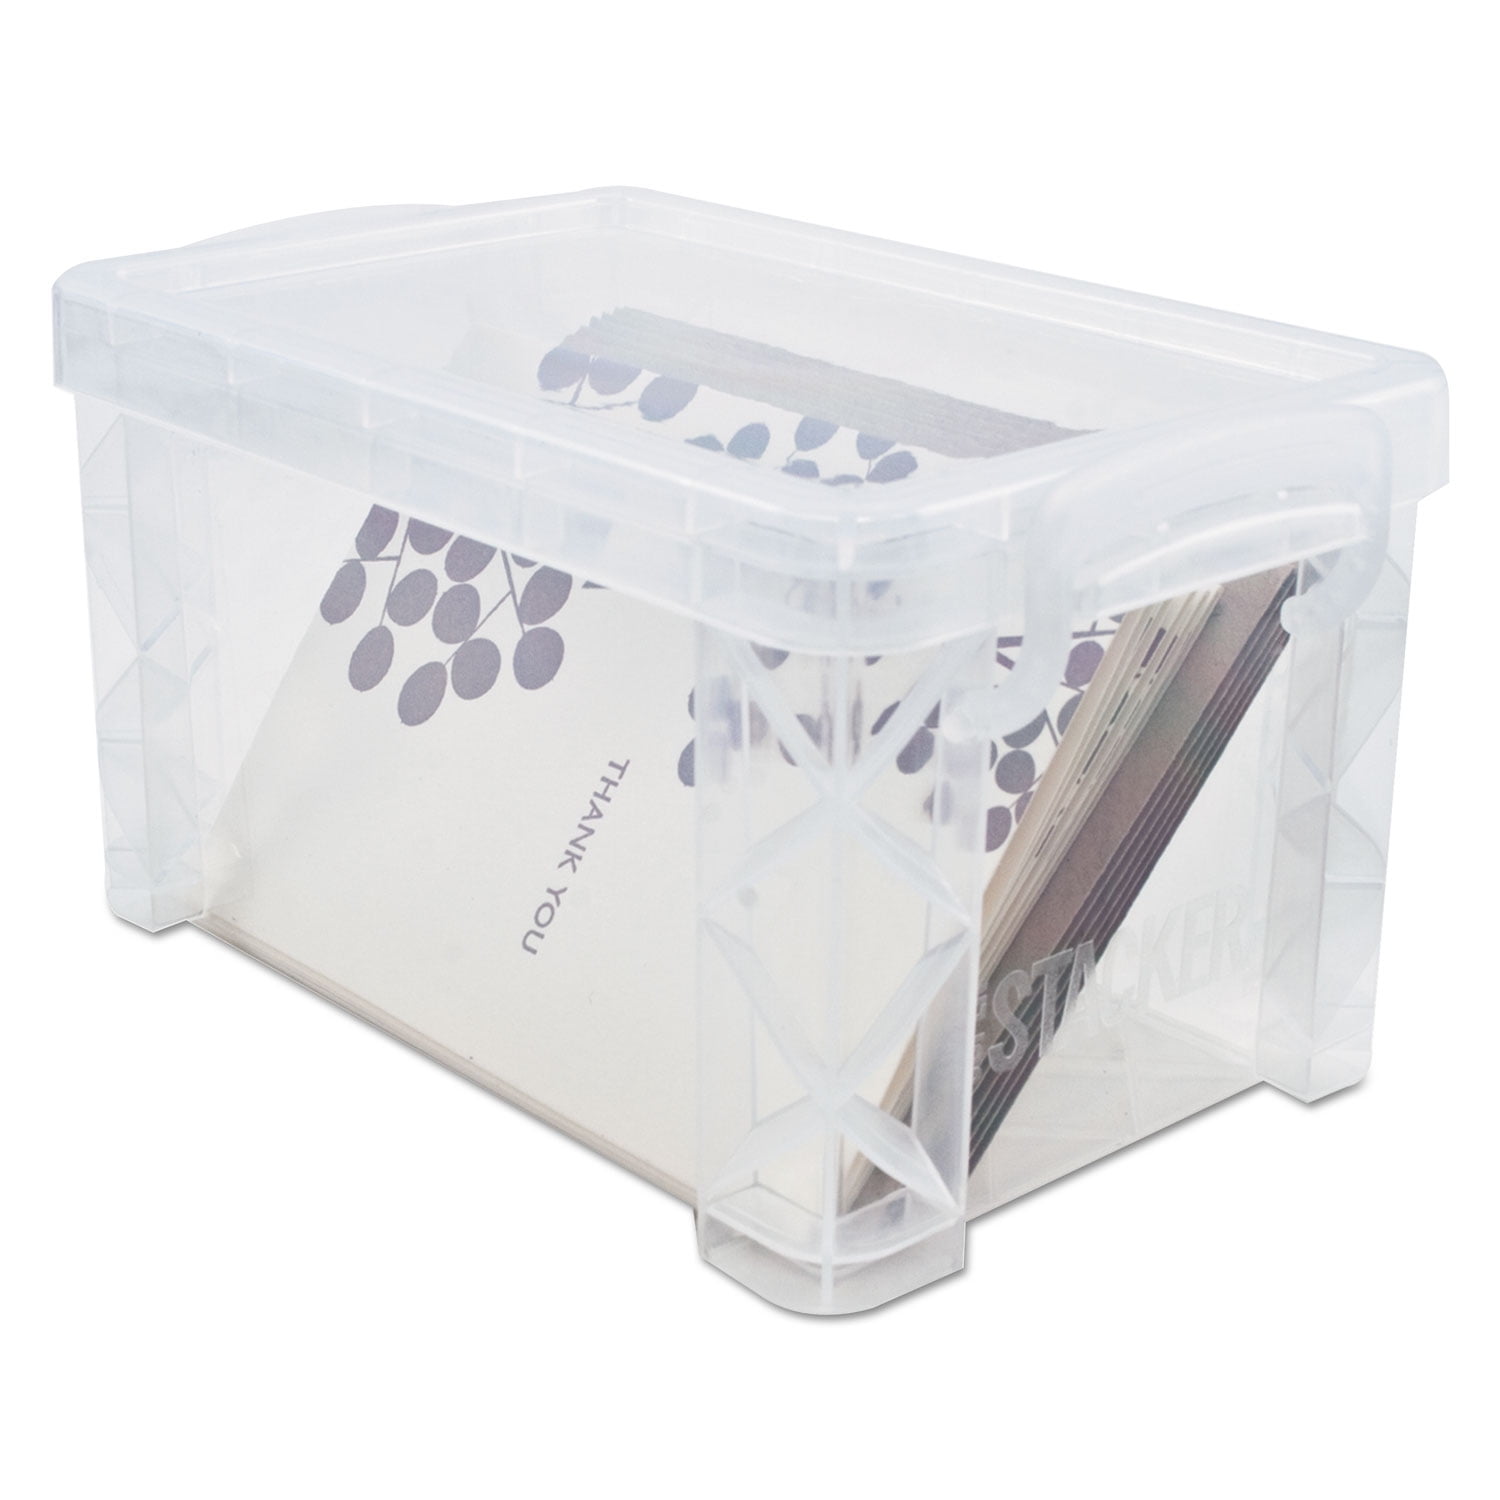 Advantus Super Stacker Divided Storage Box with Blue Tray & Handles